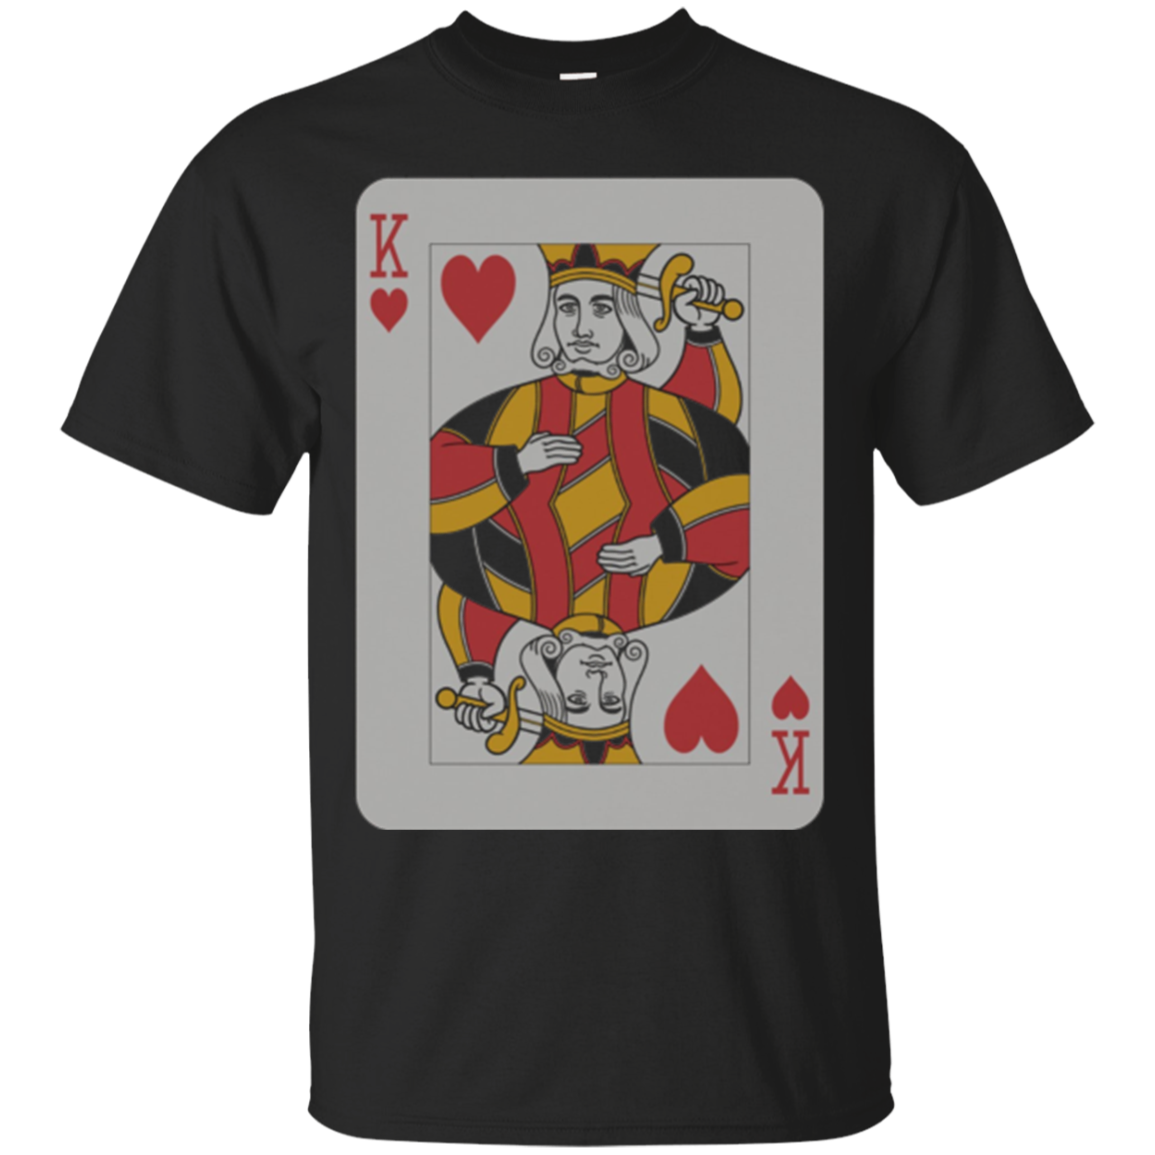 King Hearts T-shirt Play Win Poker Party Player Costume